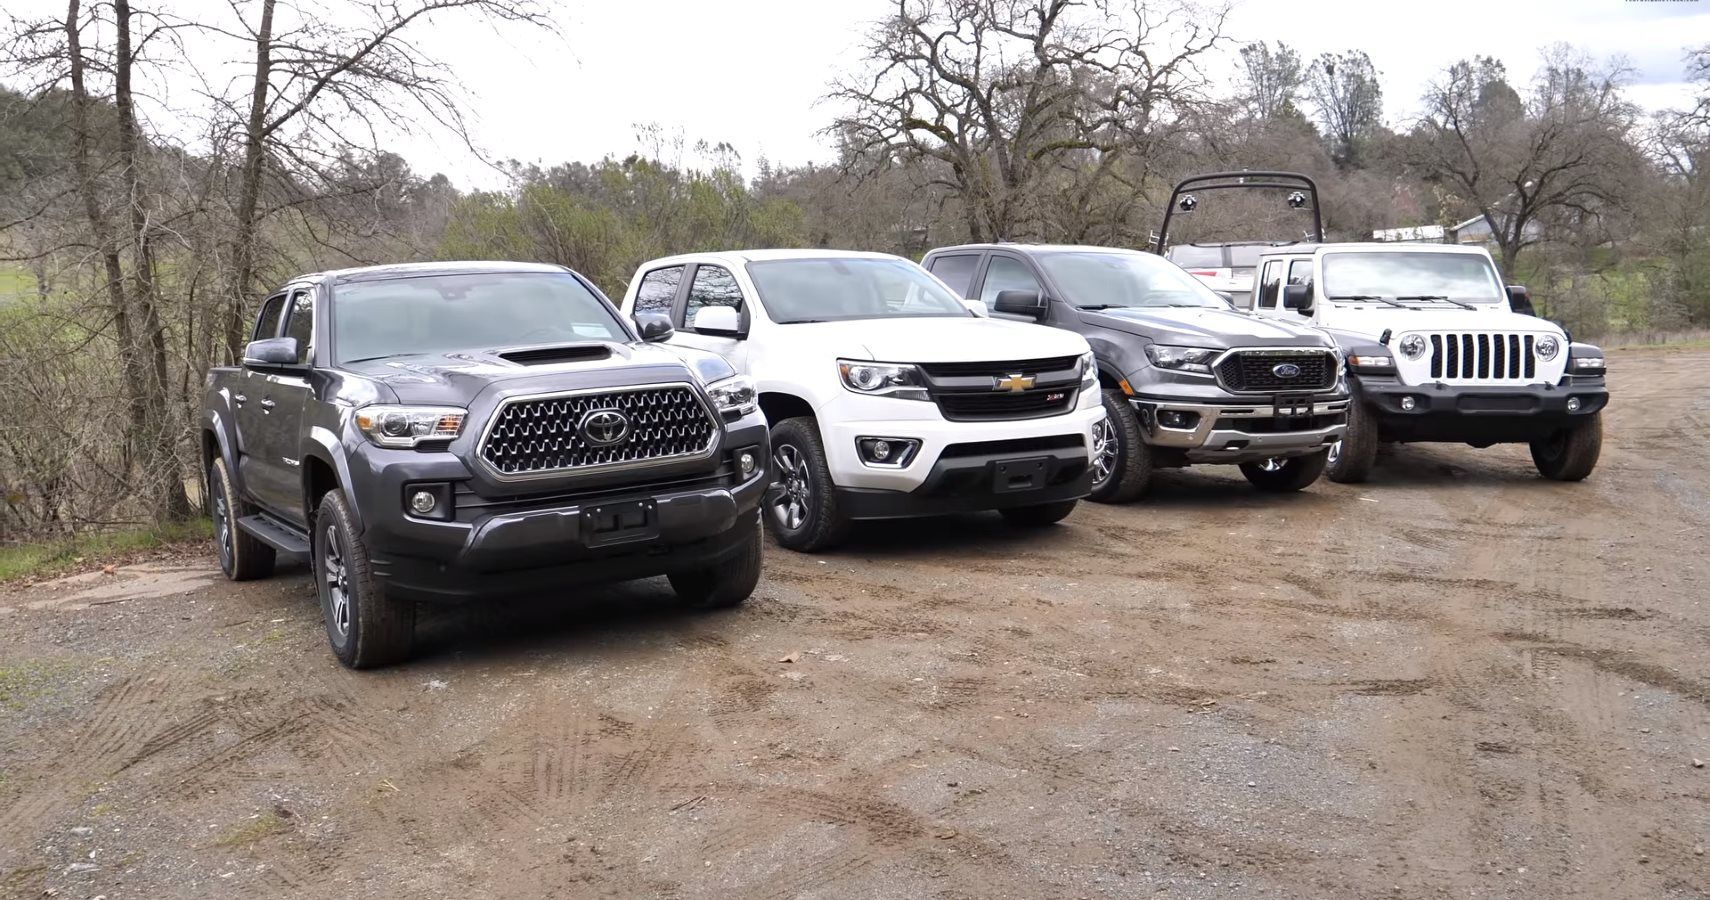 How Does The 2020 Jeep Gladiator Compare To Other Midsize Pickups? [VIDEO]